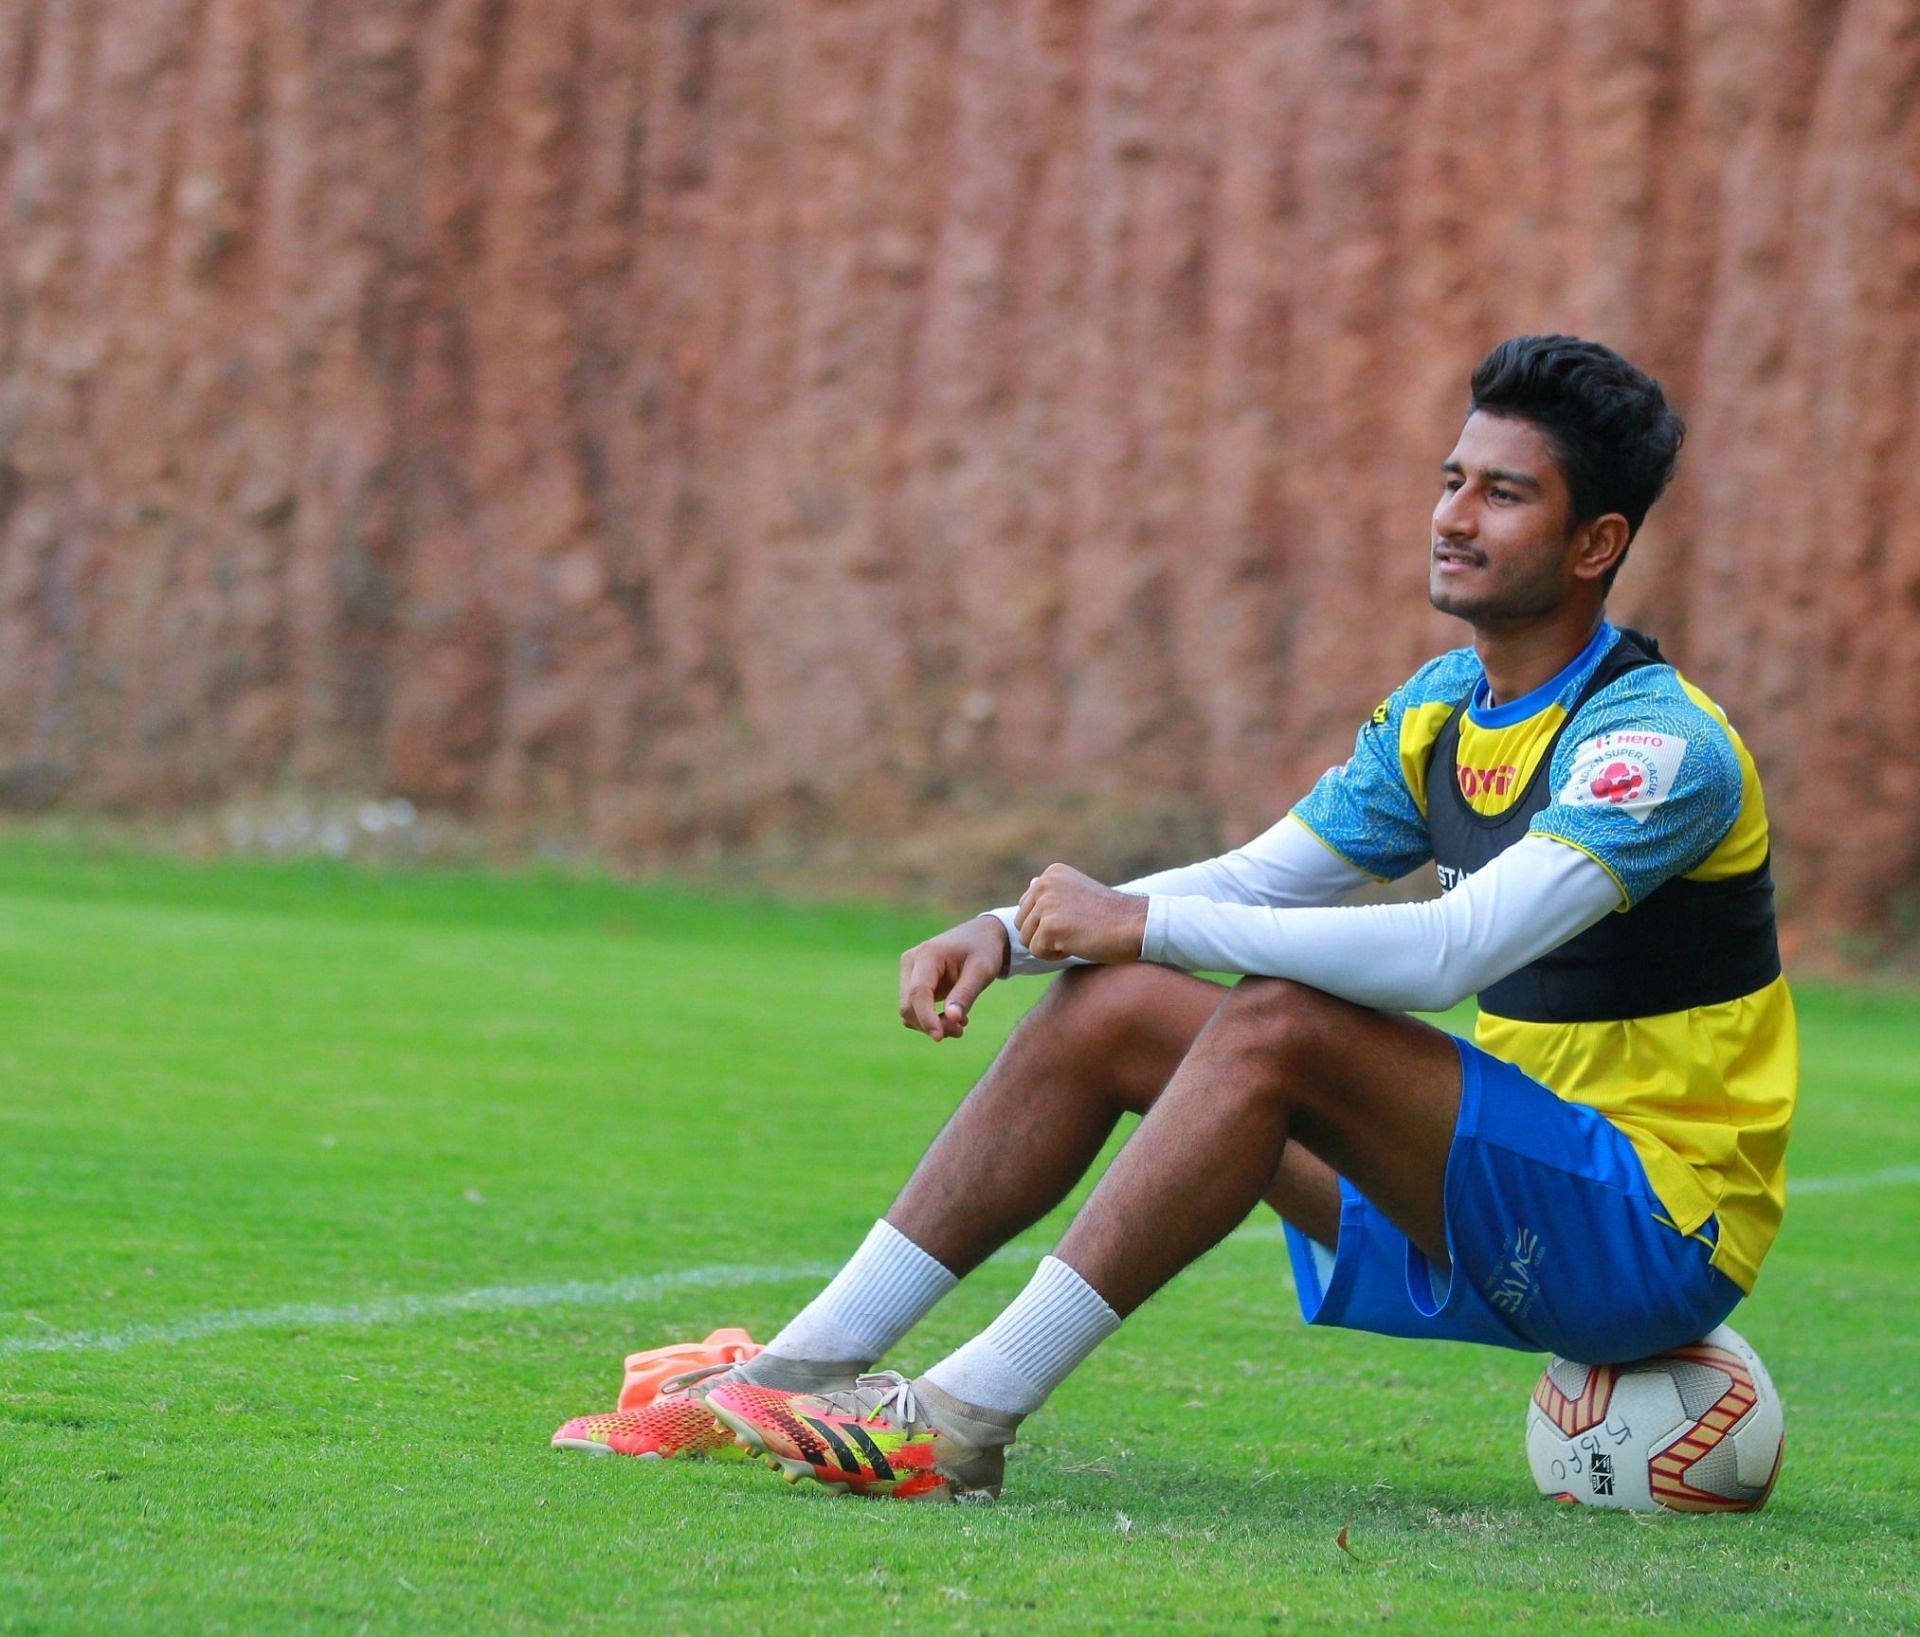 Subha Ghosh has joined Gokulam Kerala FC after a stint with Kerala Blasters